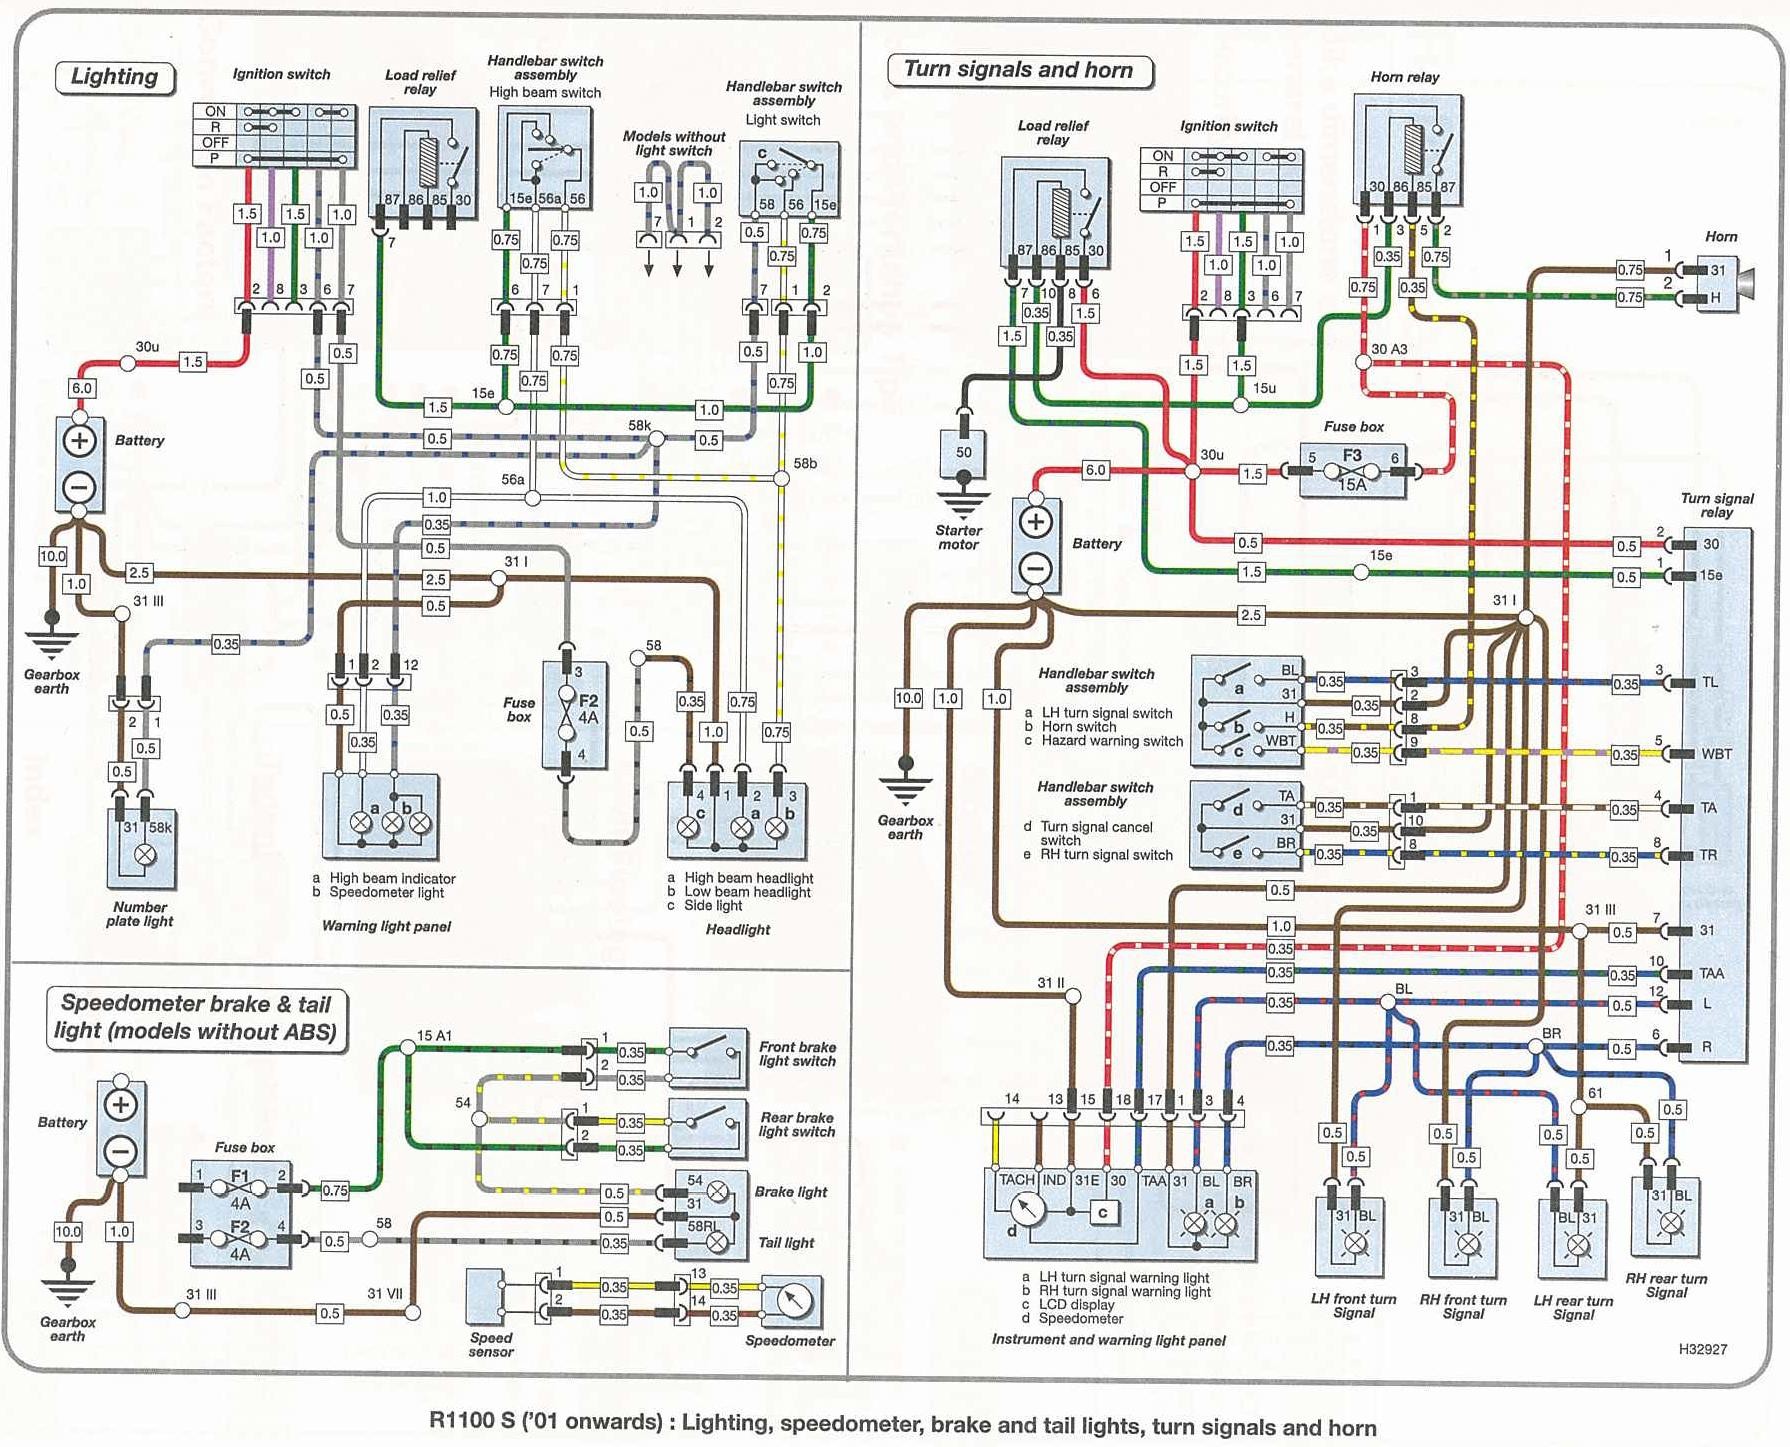 bmw wiring diagrams wellread me stereo wiring diagram bmw r1100s wiring diagrams and bmw discrd me